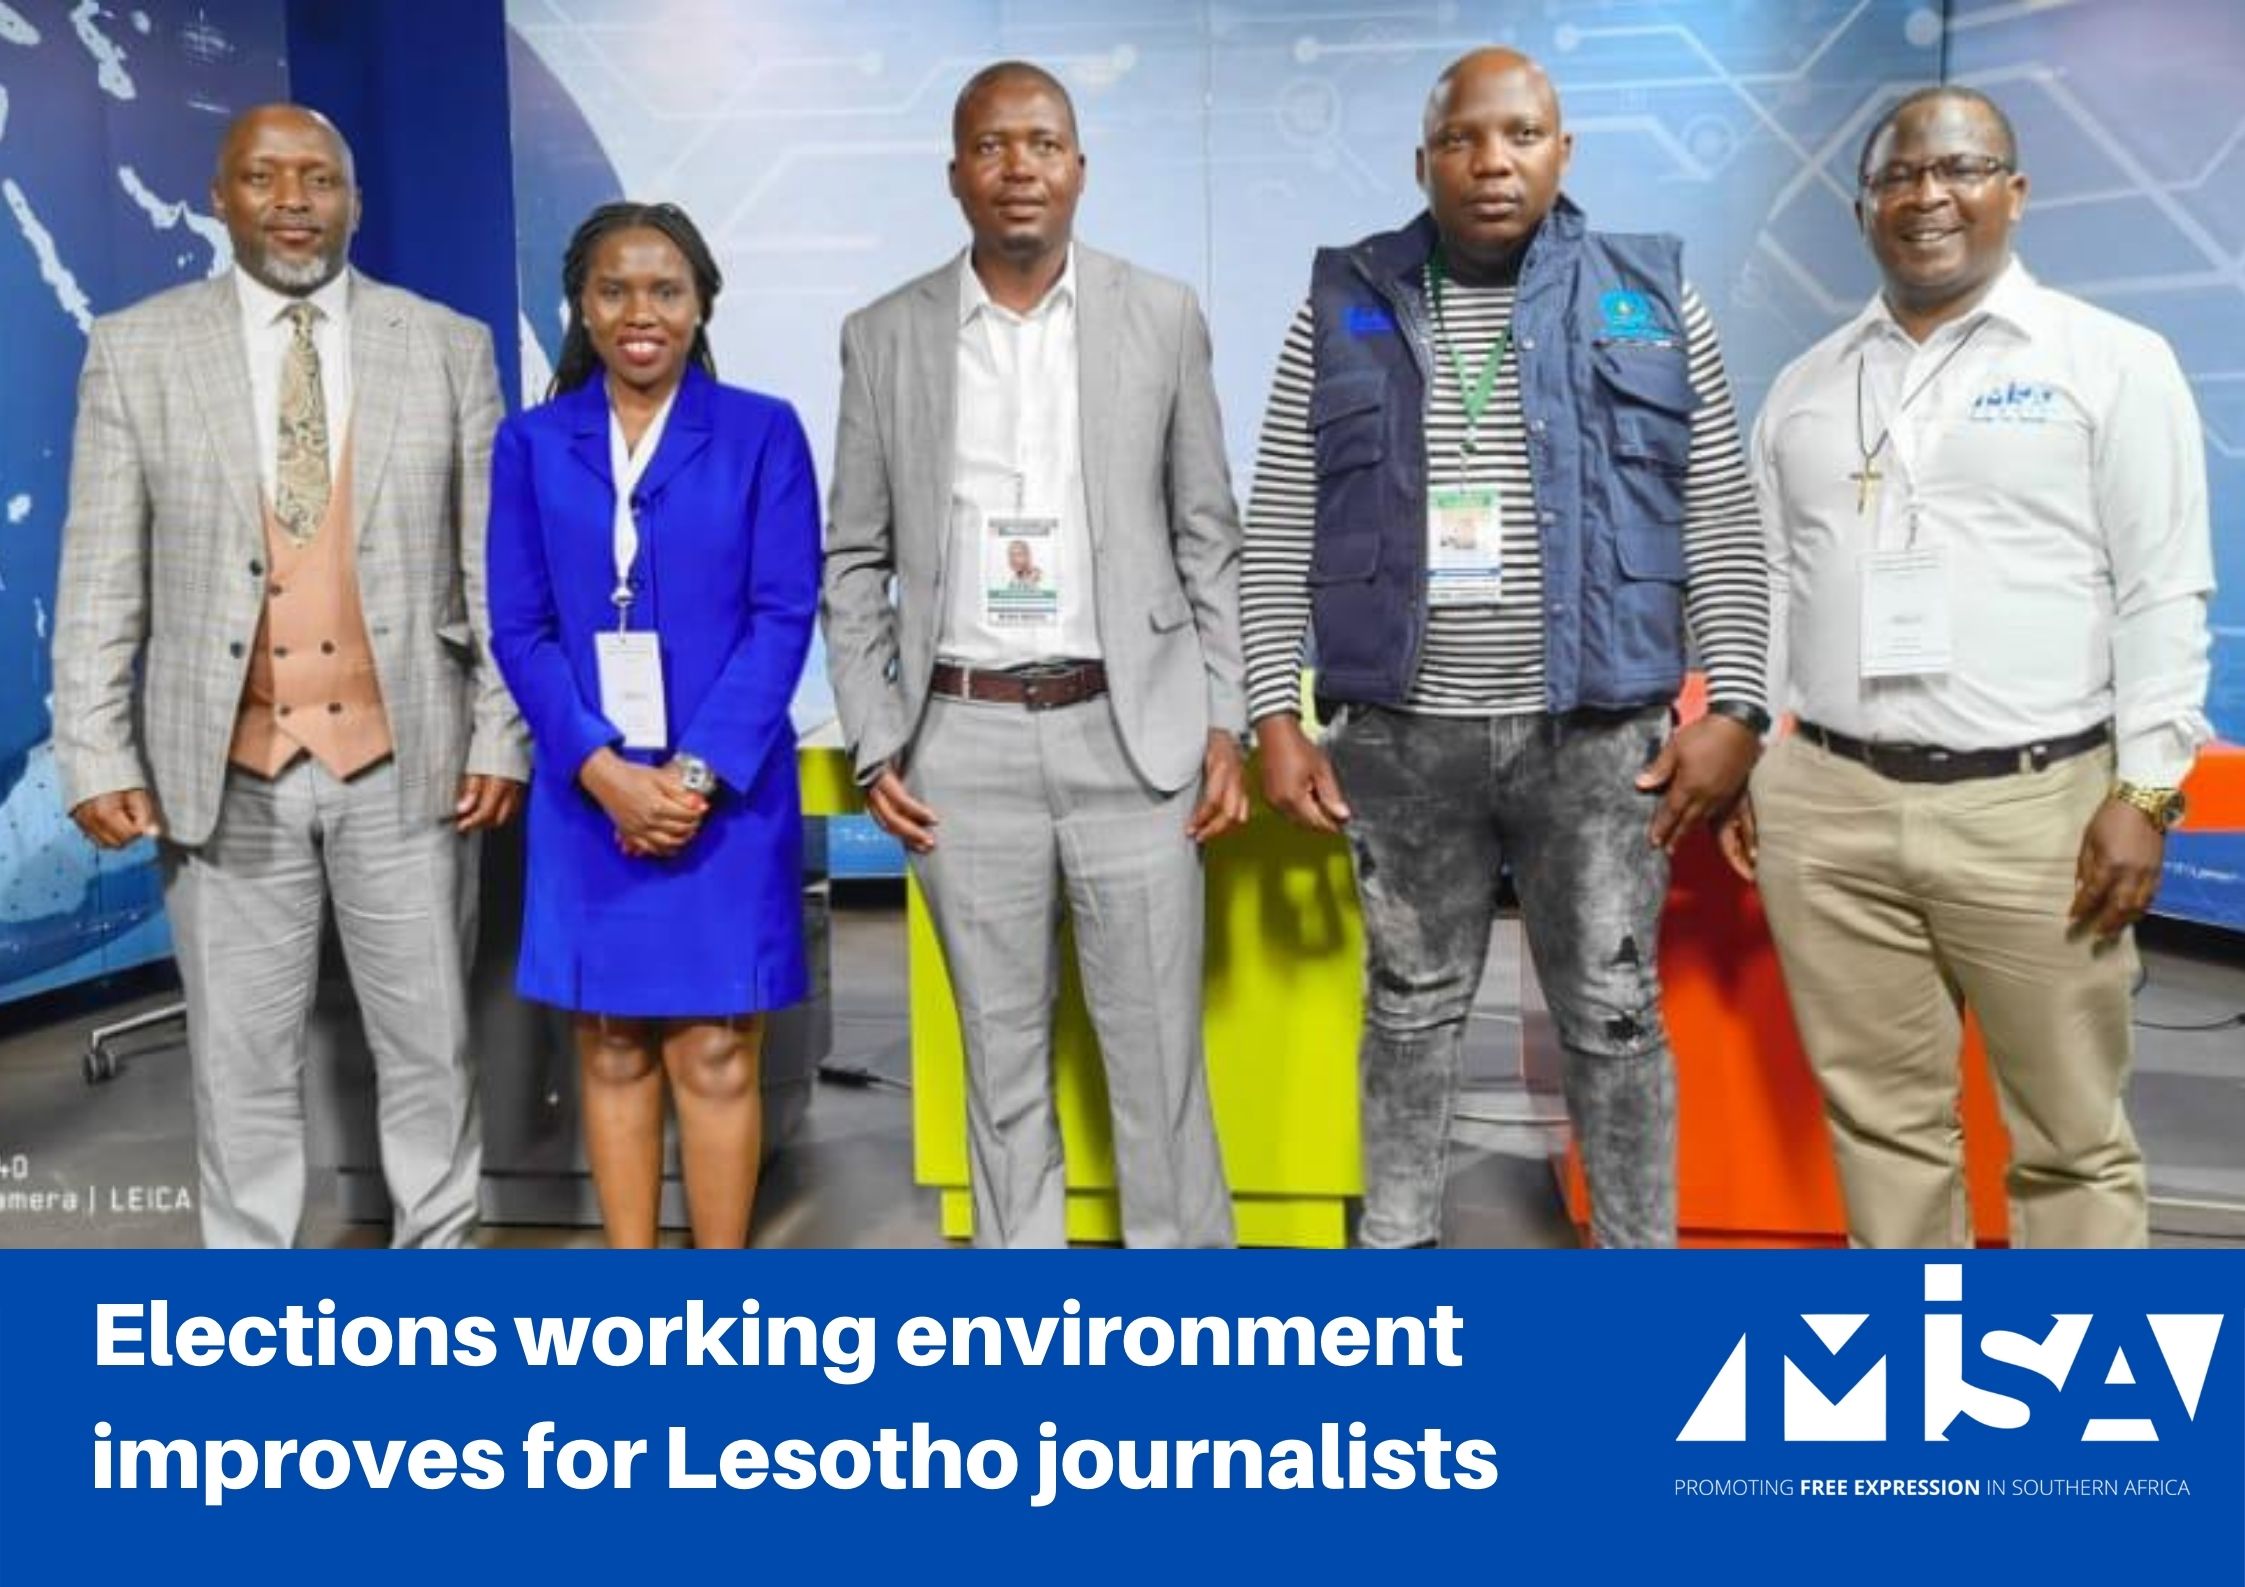 Elections working environment improves for Lesotho journalists